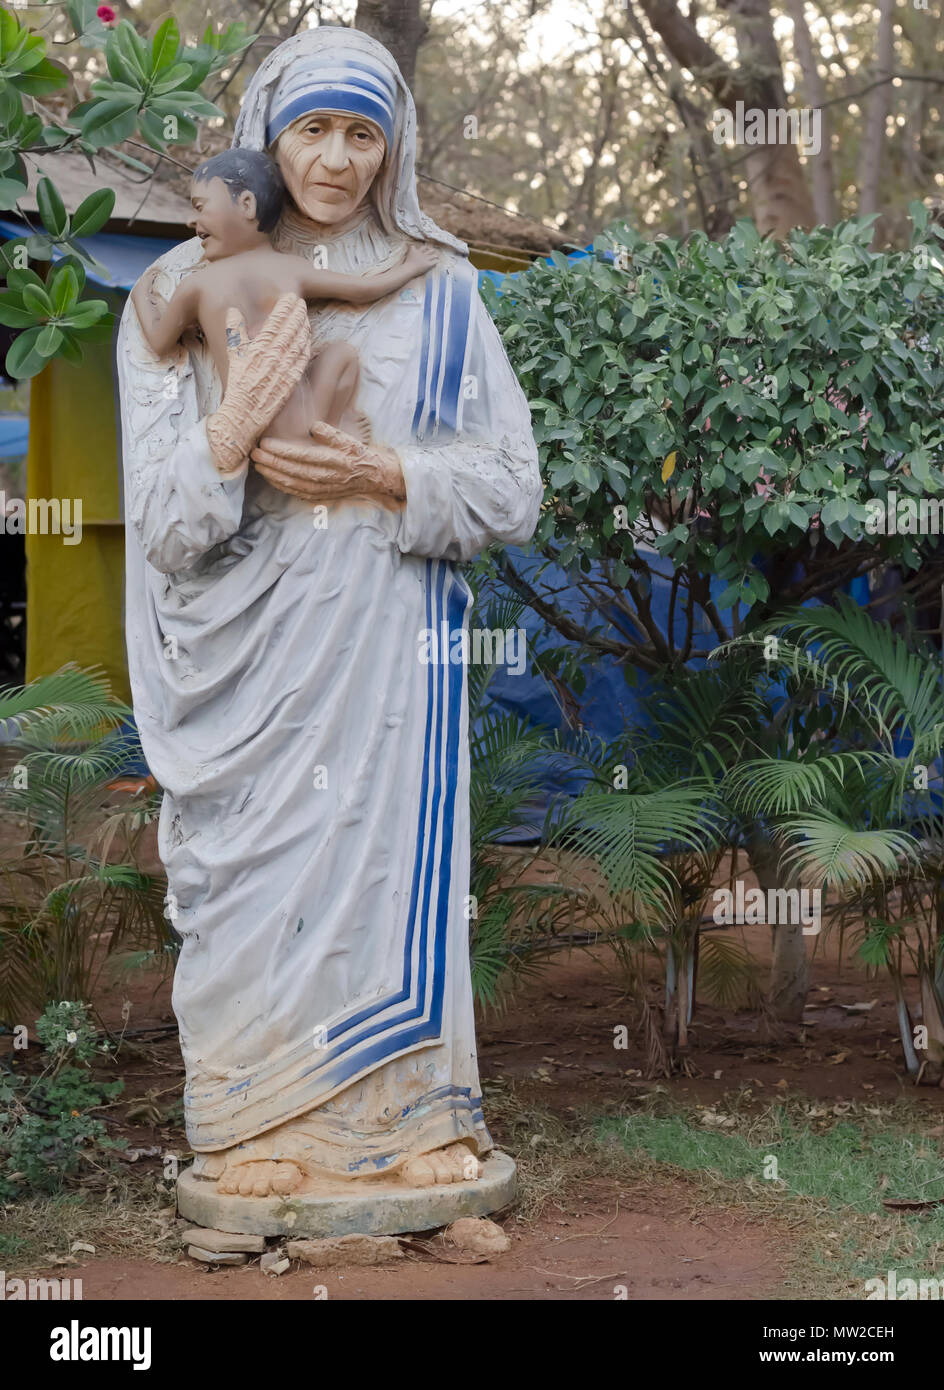 A weathered clay statue of Mother Teresa, founder of the Missionaries of Charity, at Shilparamam arts and crafts village, Hyderabad, Telangana, India. Stock Photo